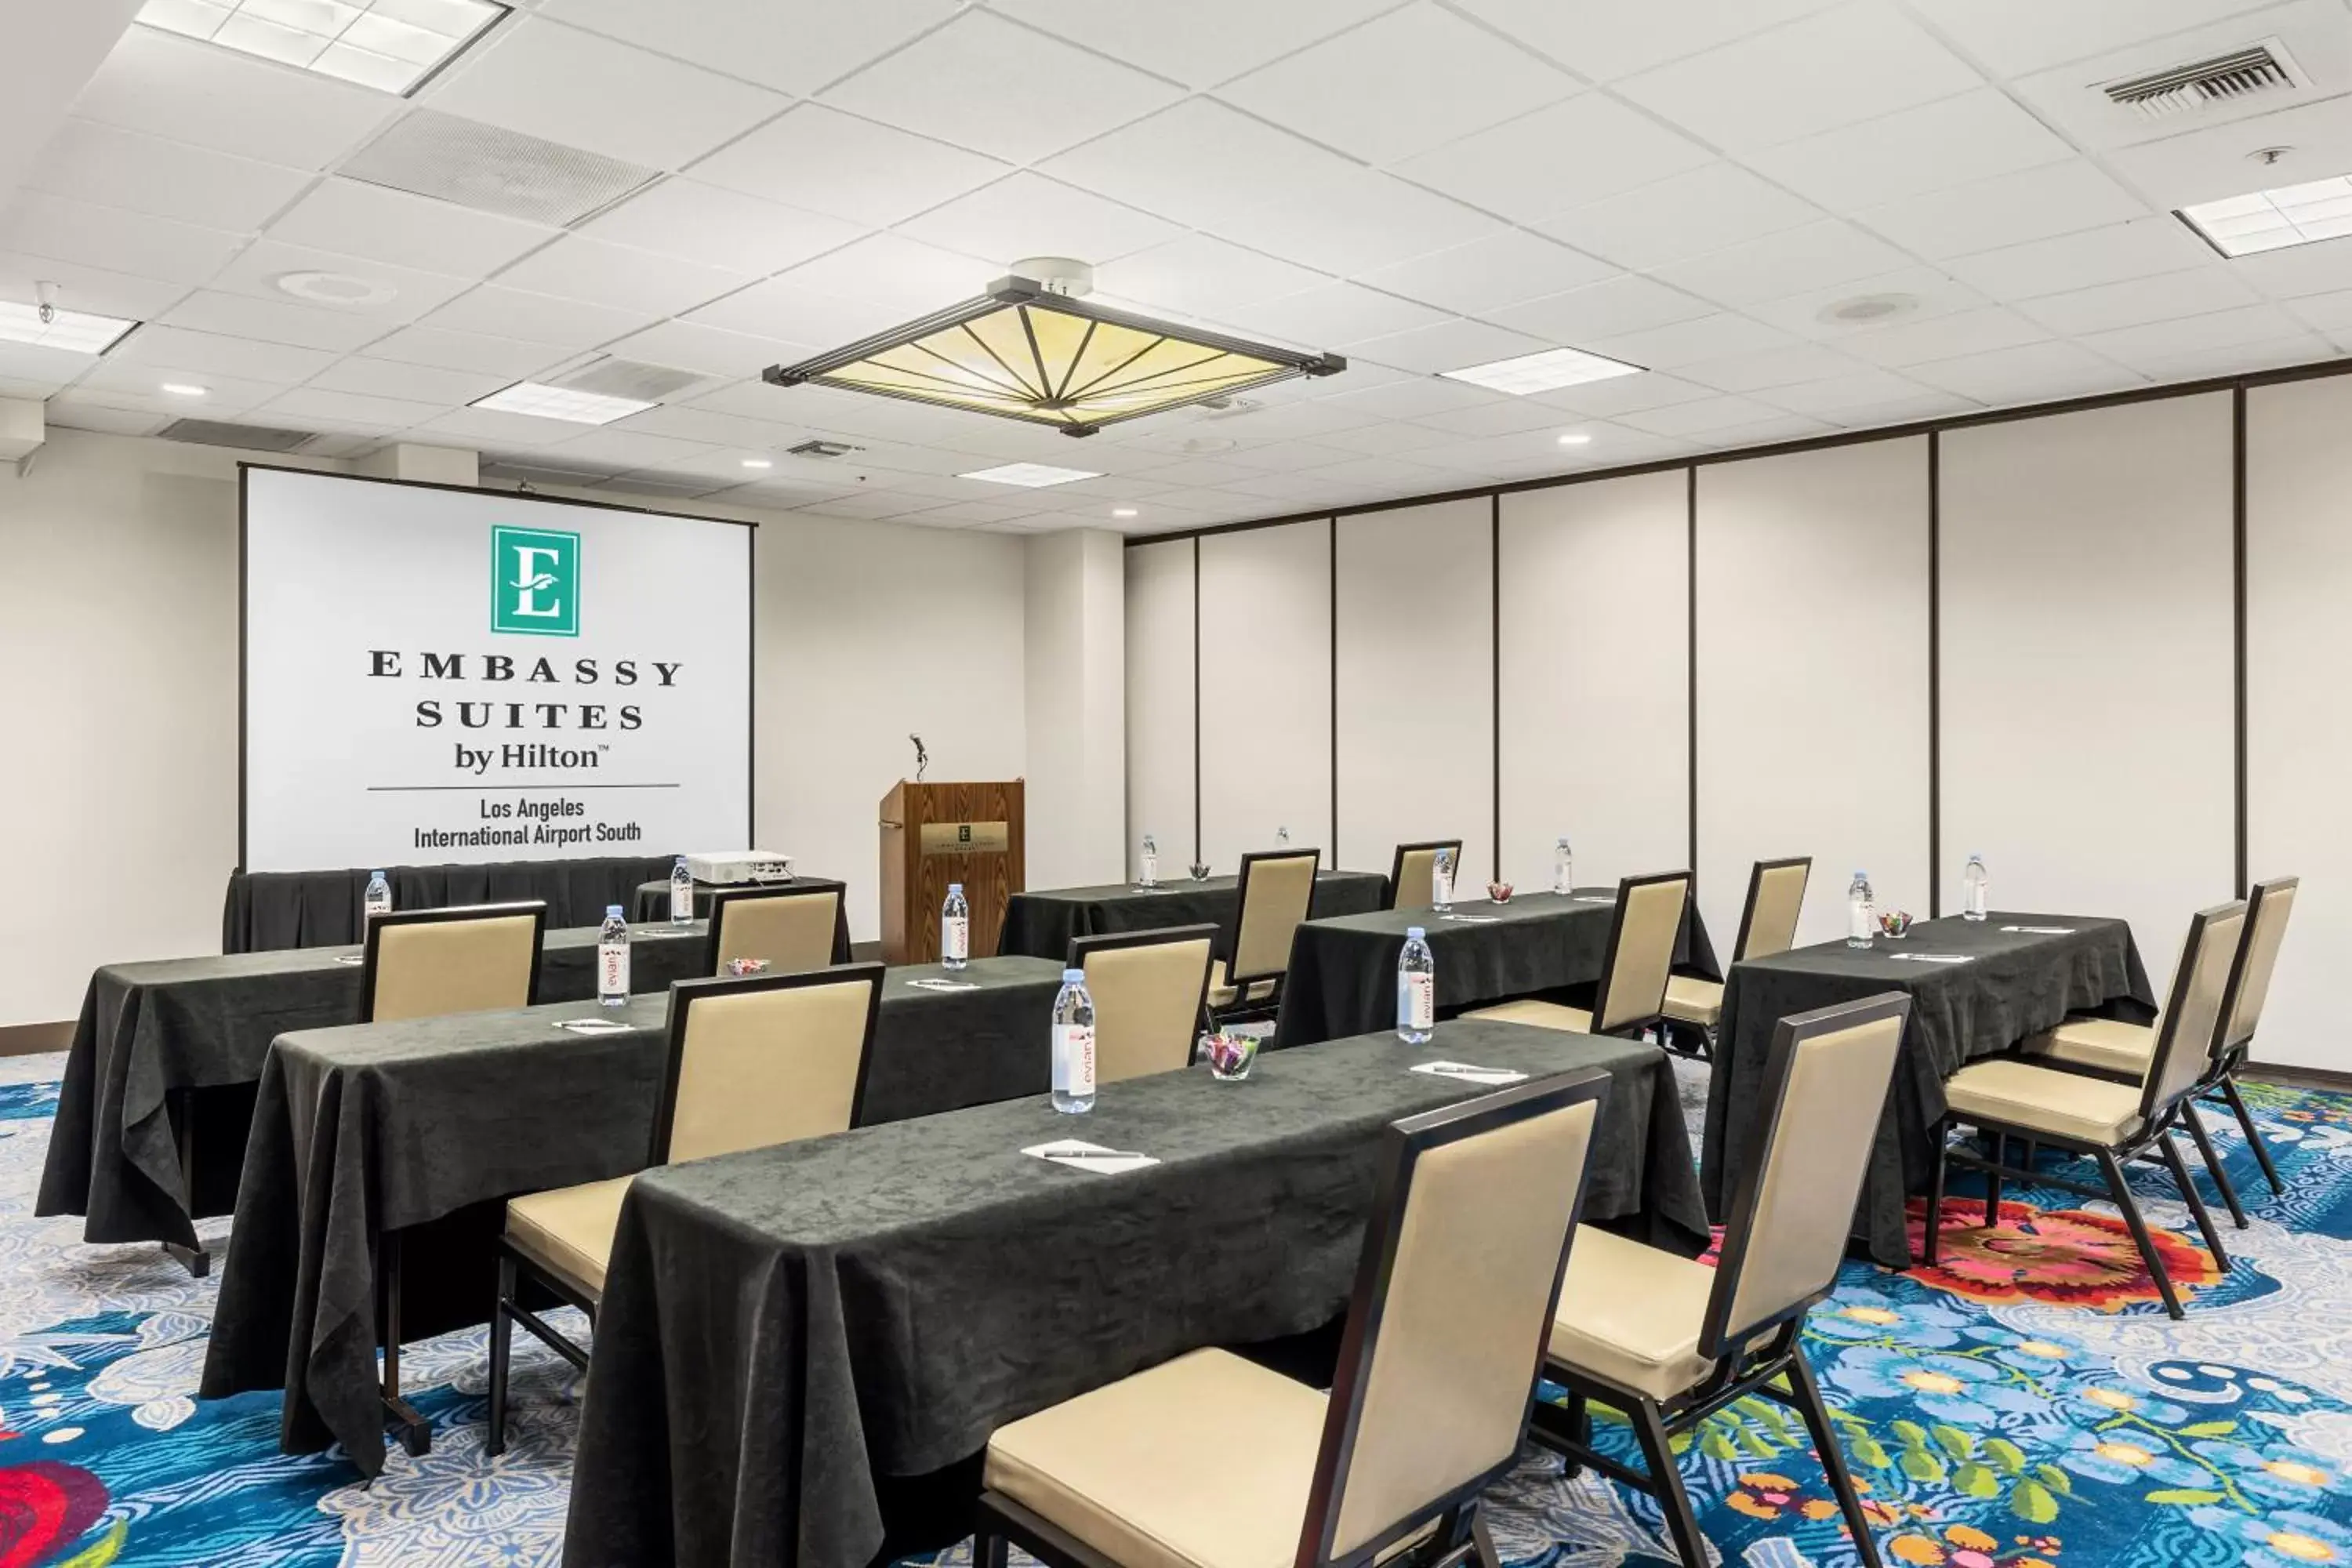 Meeting/conference room in Embassy Suites by Hilton Los Angeles International Airport South